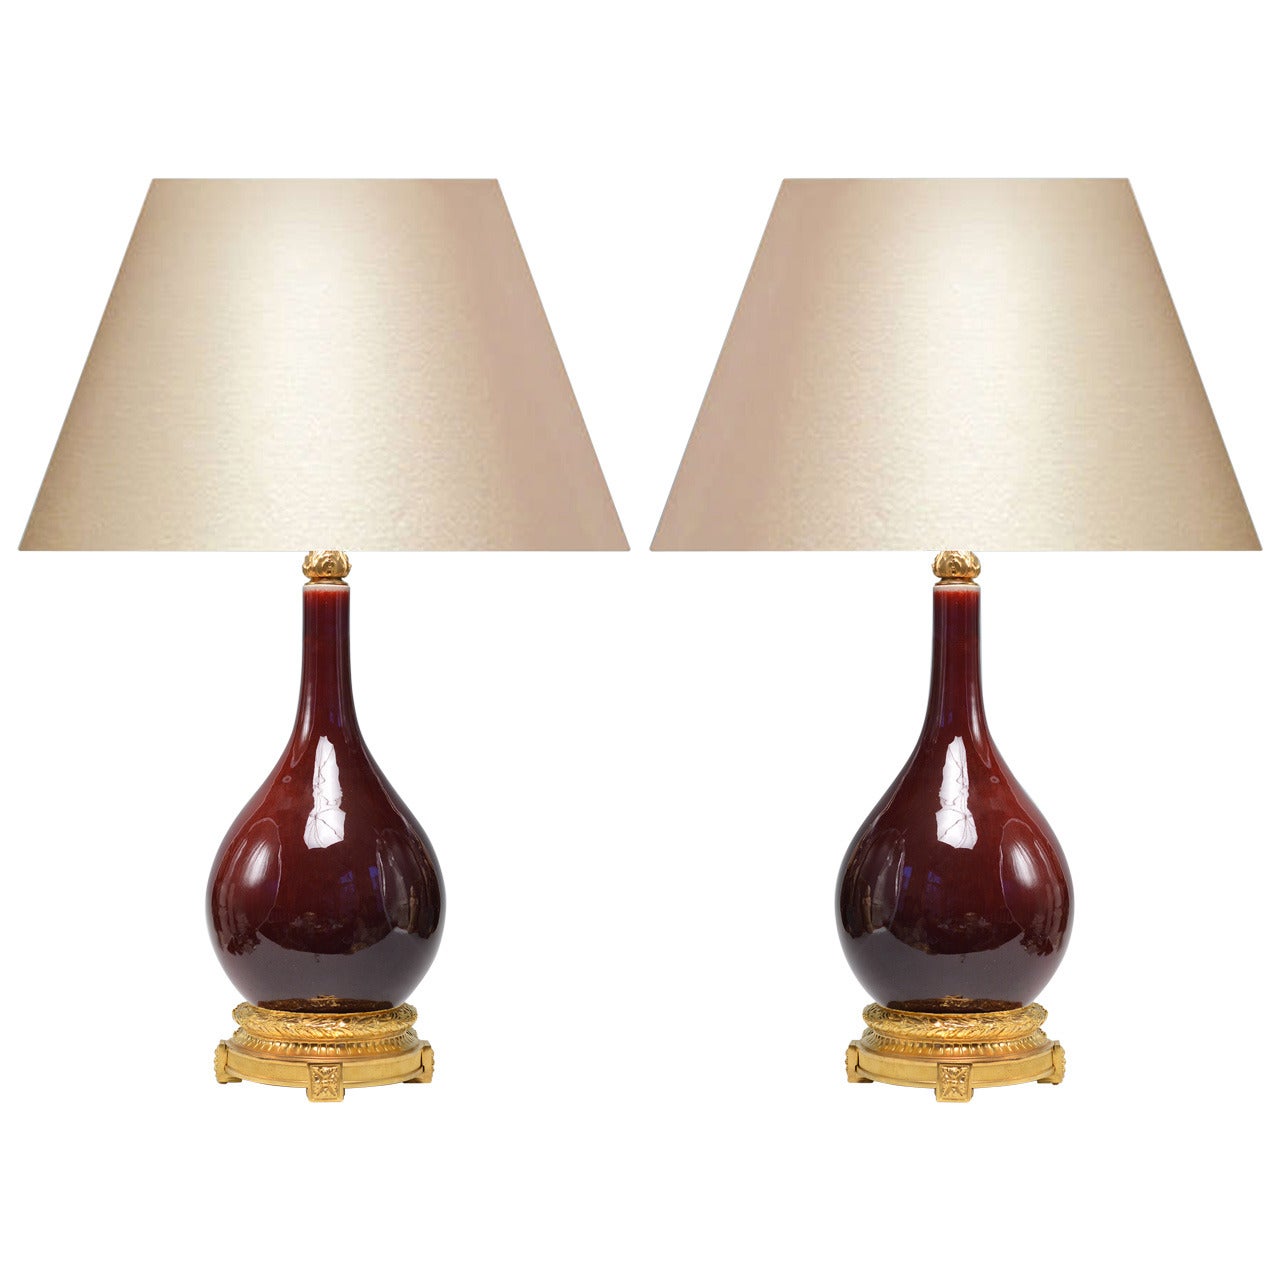 Pair of Copper Red-Glazed Porcelain Lamps with Gilt Bronze Bases